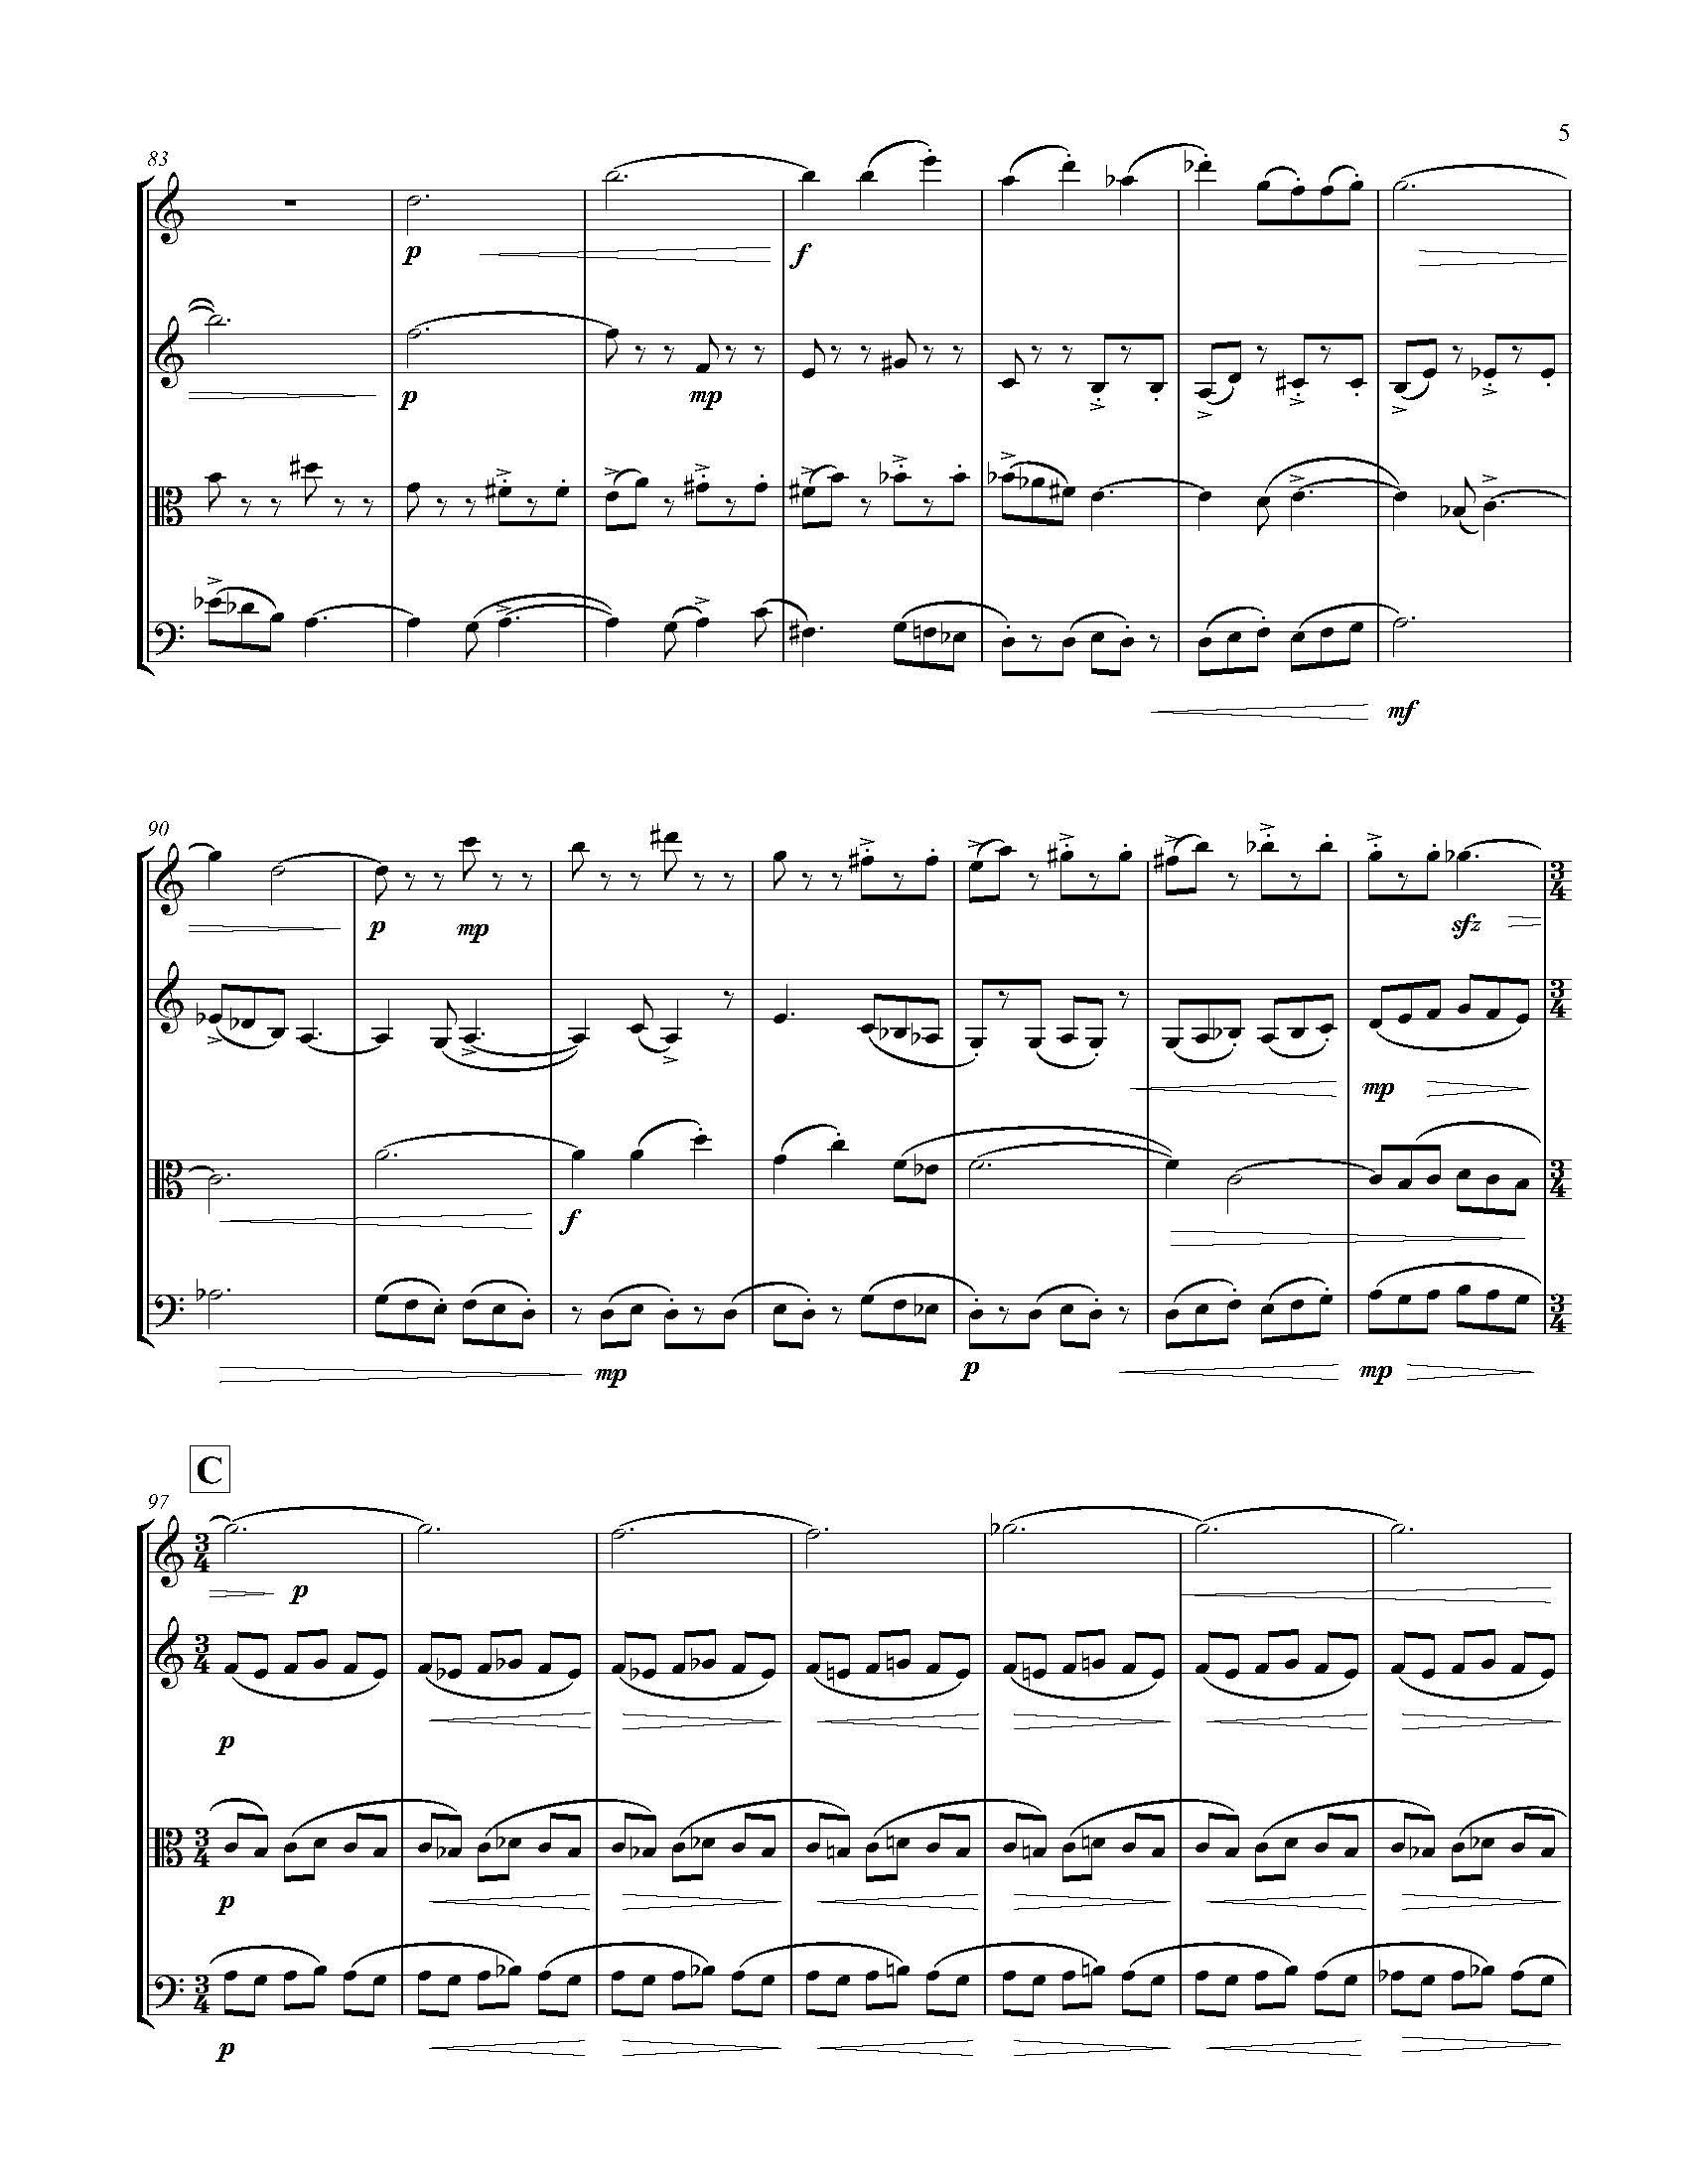 A Country of Vast Designs - Complete Score_Page_11.jpg